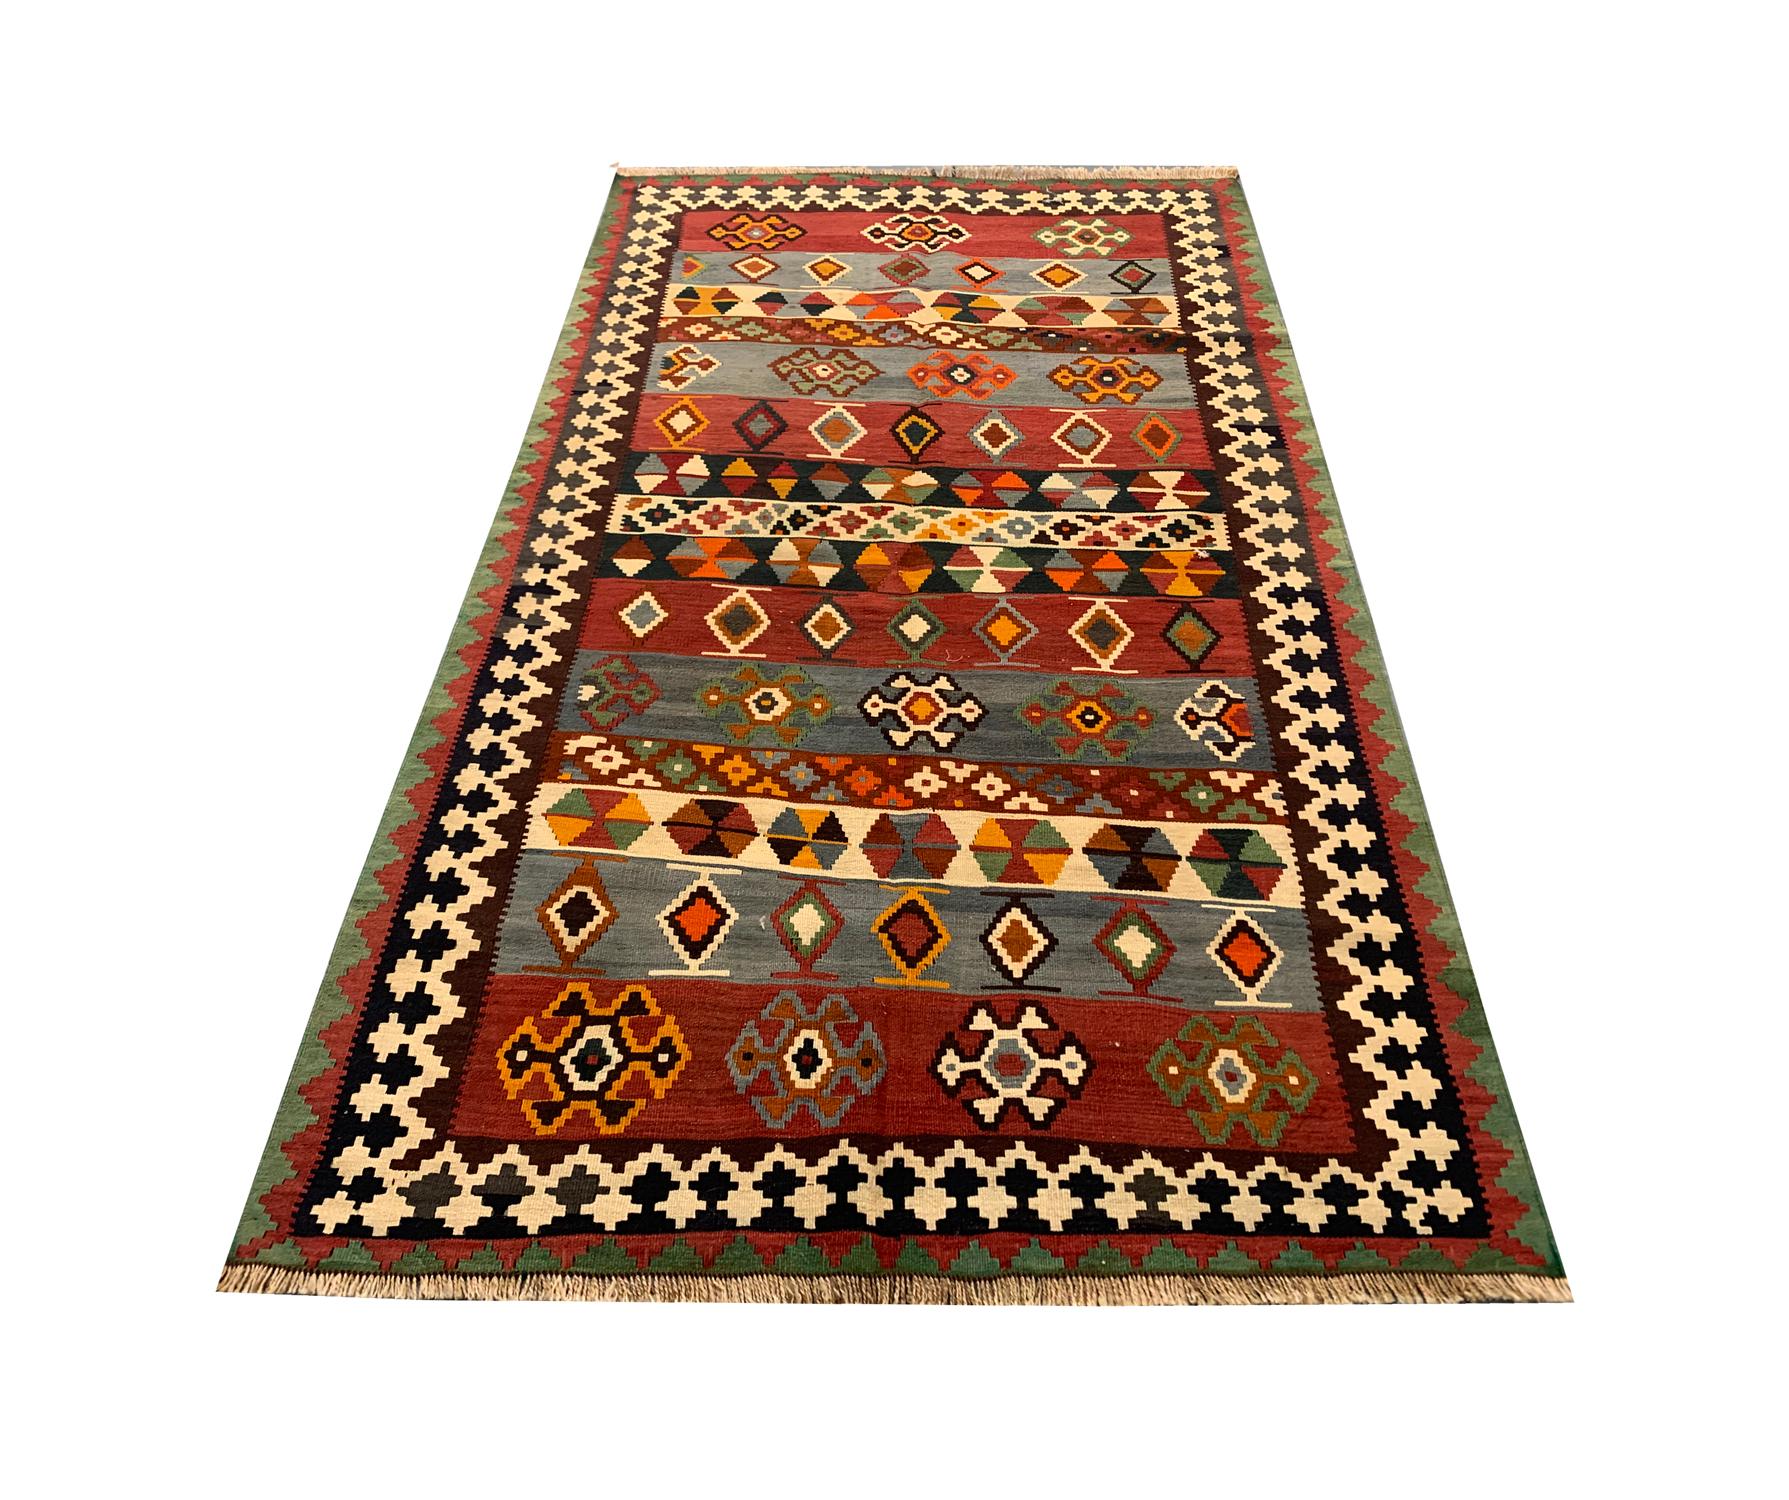 This bold geometric rug is an Antique piece. Woven by hand in the 1900s by village weavers of Azerbaijan. The central design features a bold colour palette with rich red, rust, cream and blue accents that make up the stripe tribal motif design. Both